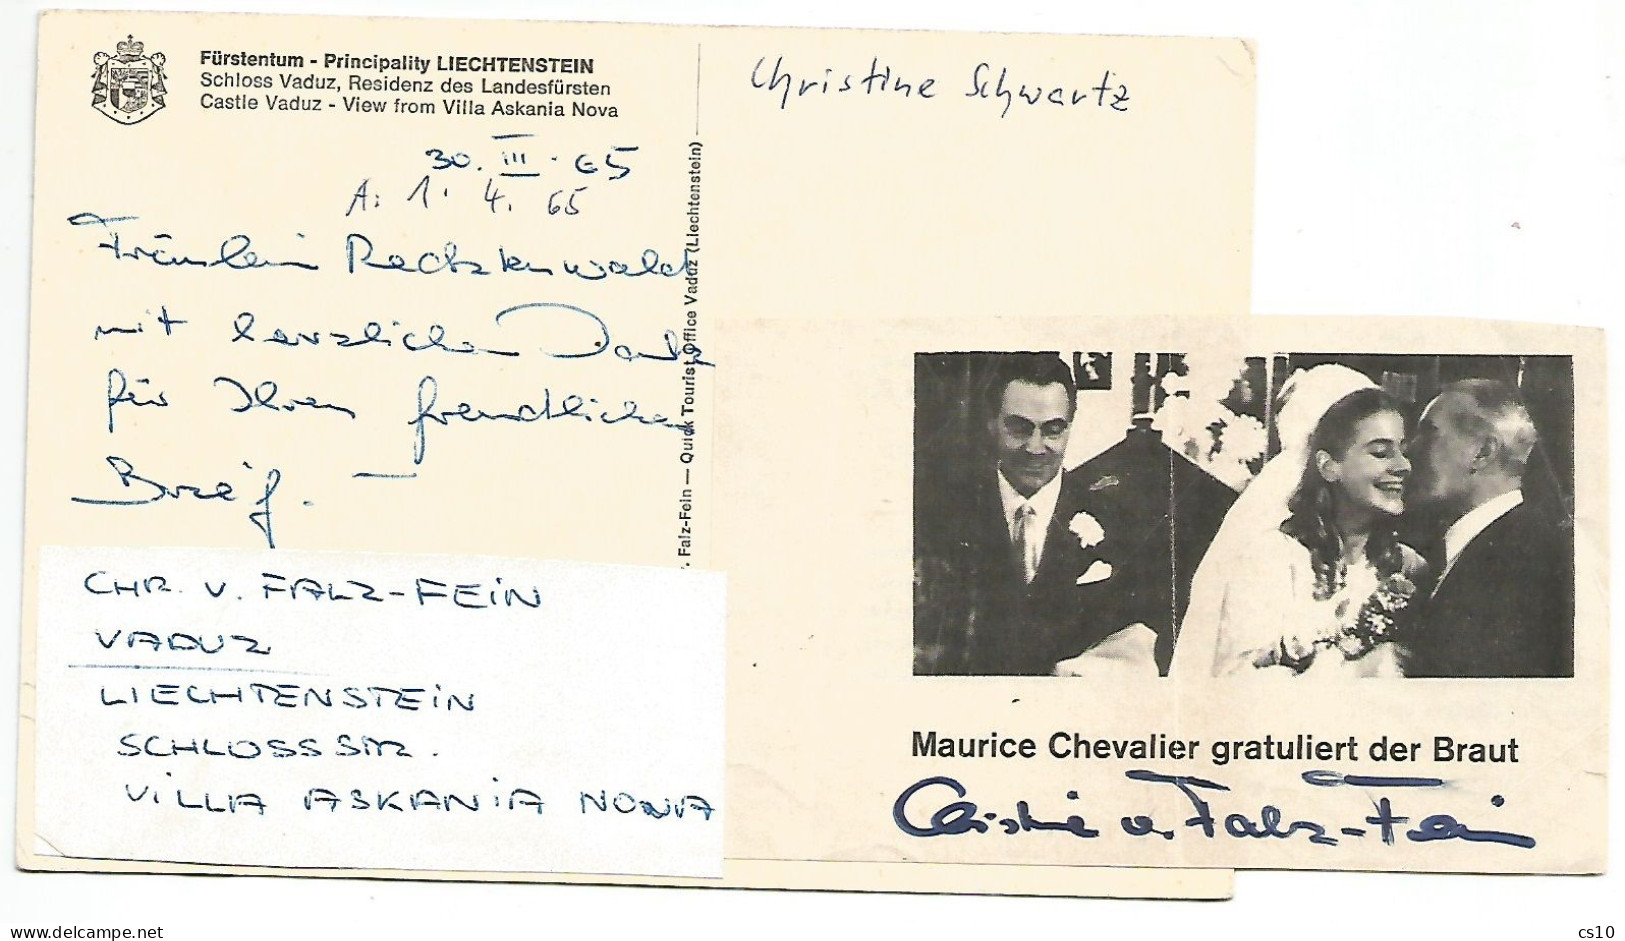 Maurice Chevalier Original Photo PPC Handsigned & Sent By The Artist From Goteborg 11nov1960 To Italy + Magazine News!!! - Singers & Musicians